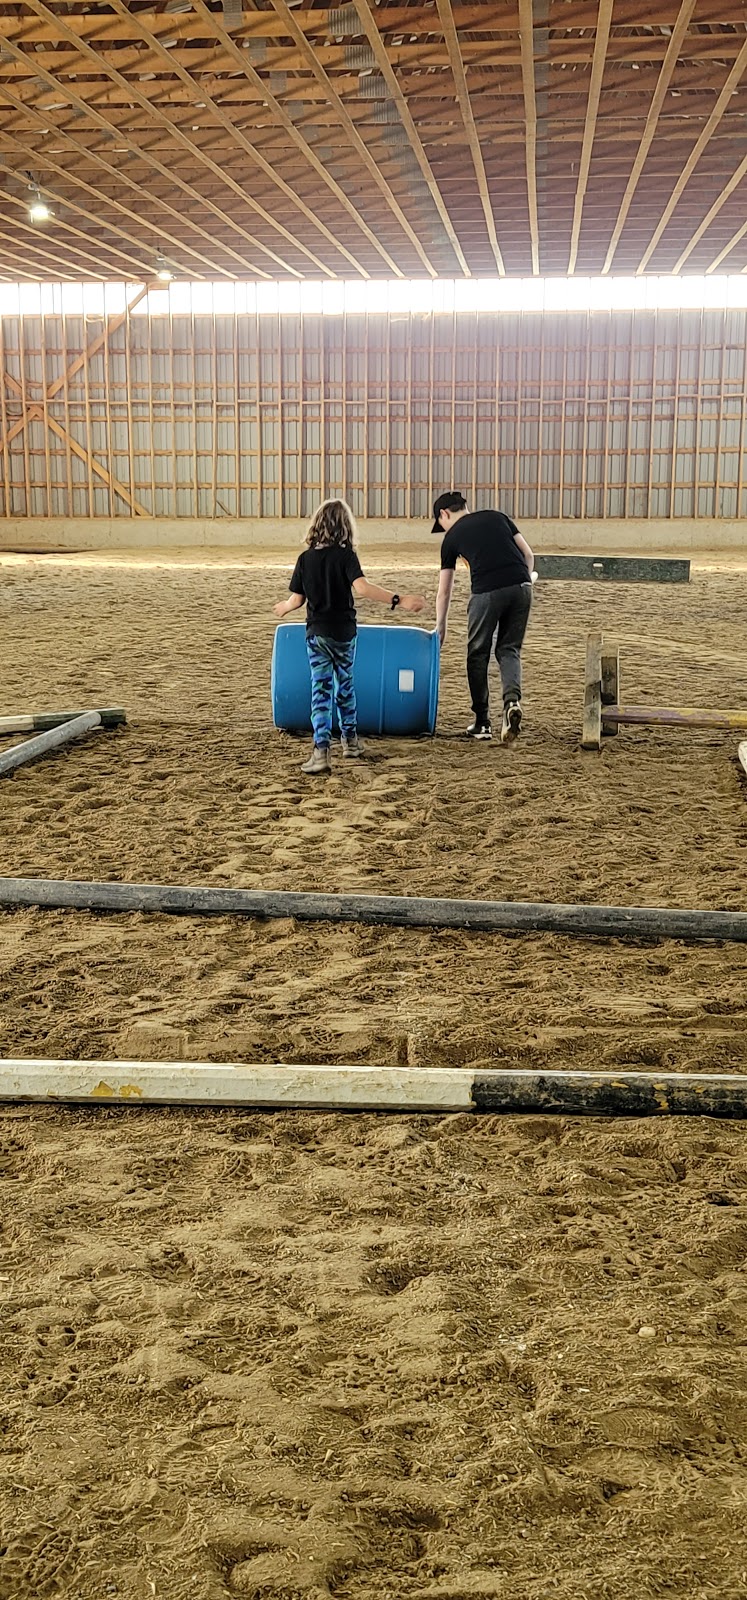 Transitions Equine Assisted Learning | 675671 16 Line, Innerkip, ON N0J 1M0, Canada | Phone: (226) 232-5410